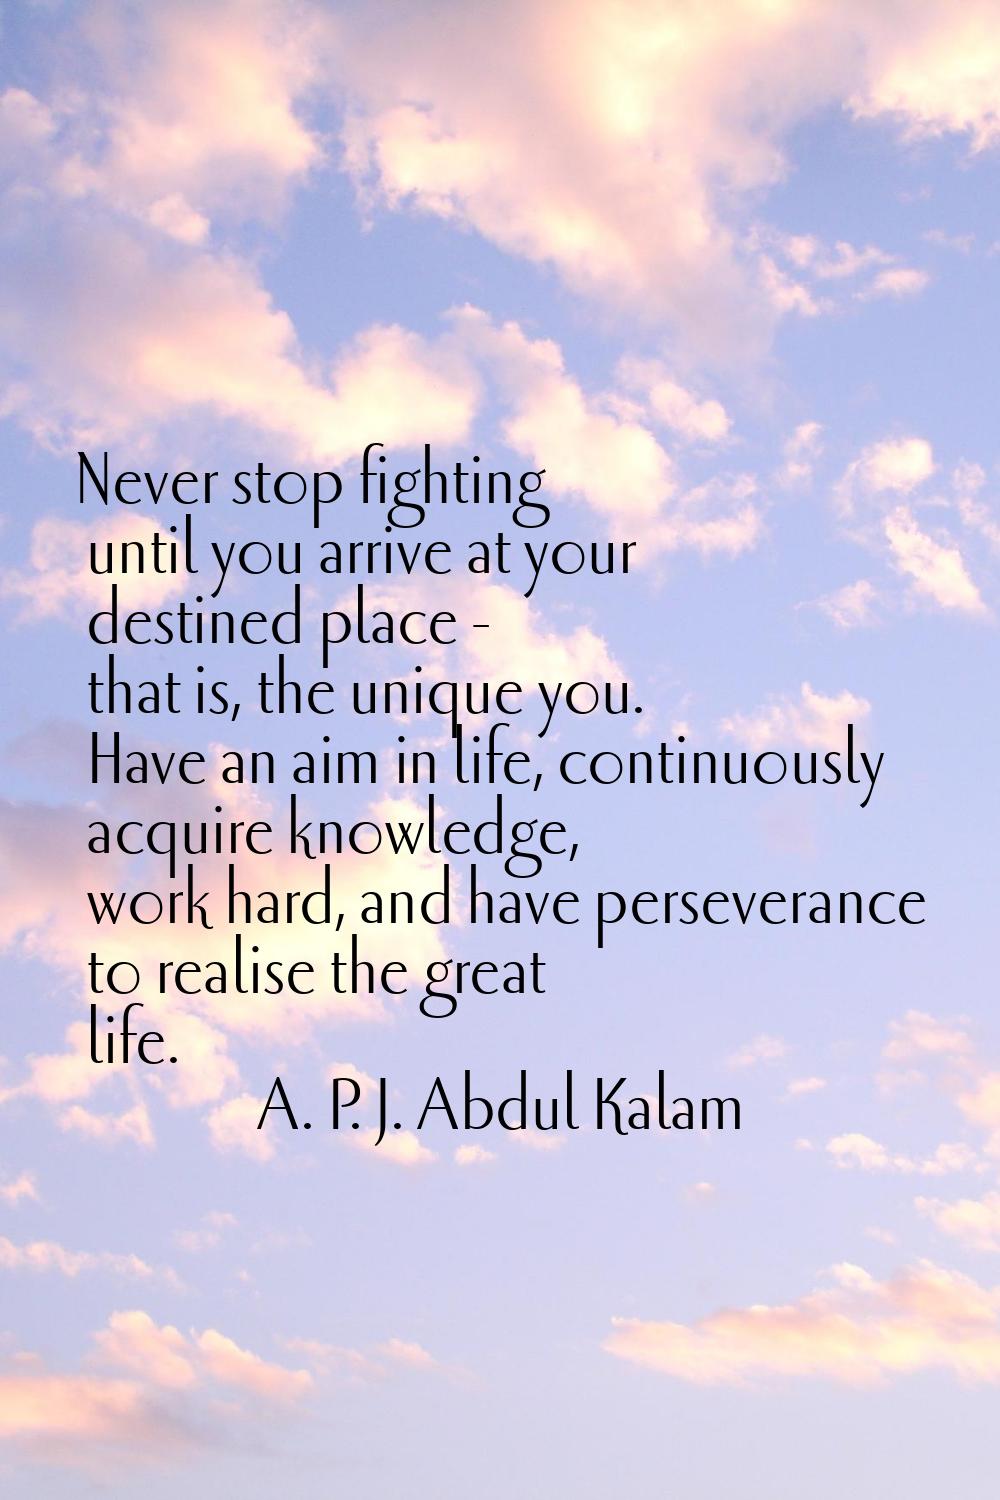 Never stop fighting until you arrive at your destined place - that is, the unique you. Have an aim 